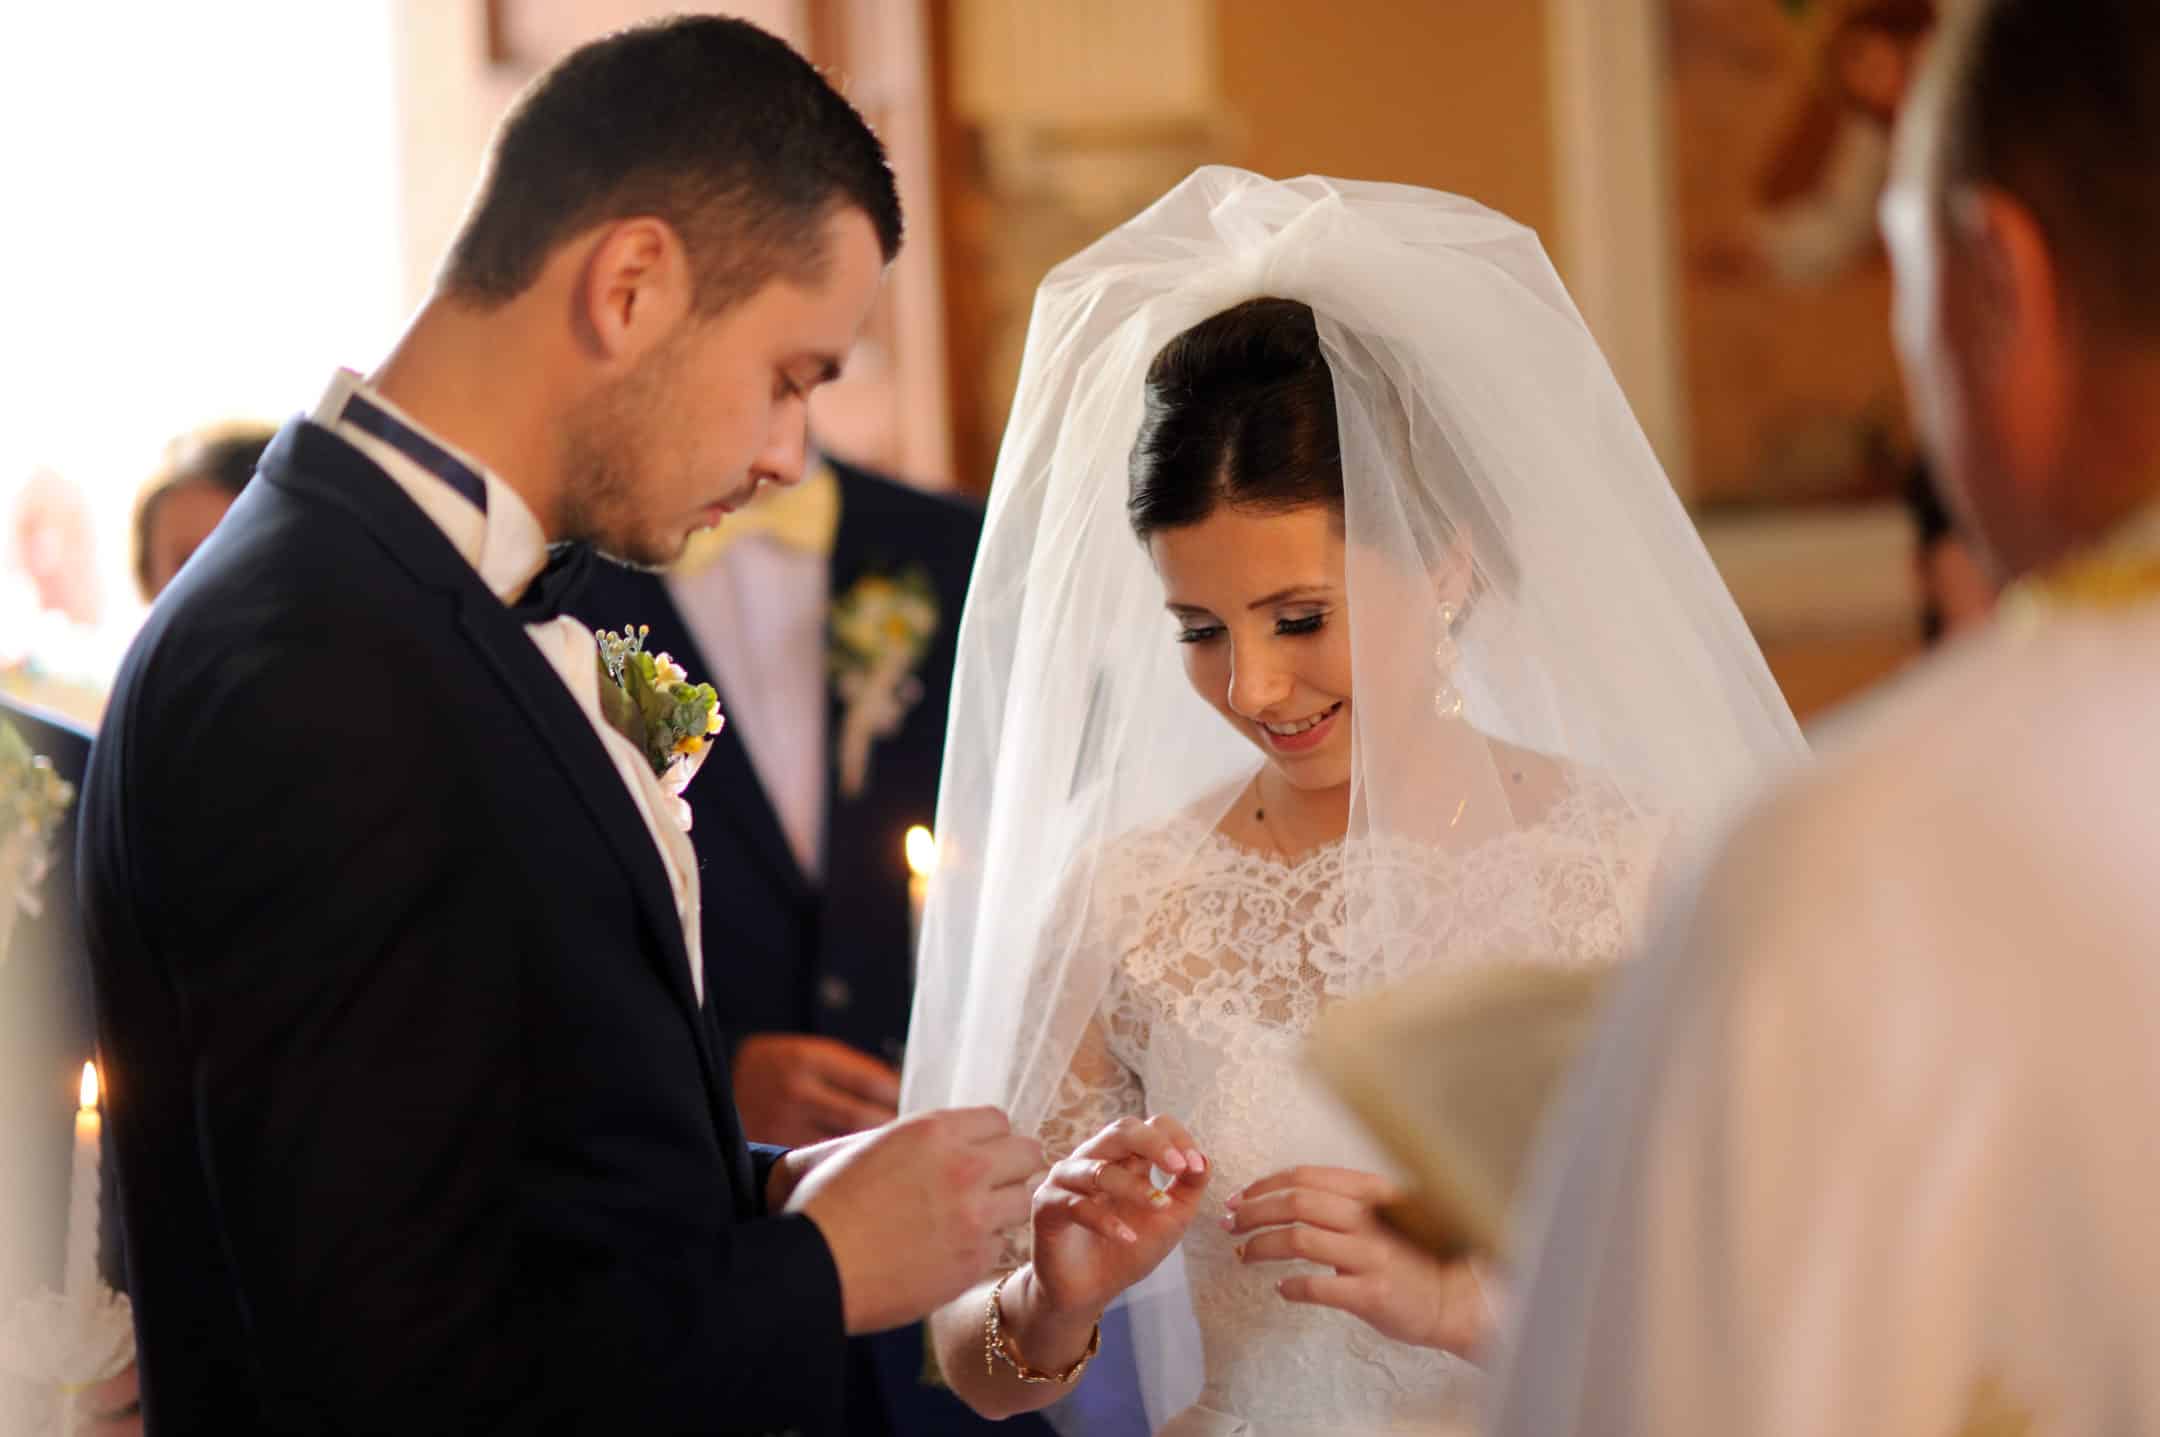 Bride and Groom exchanging rings during marriage ceremony